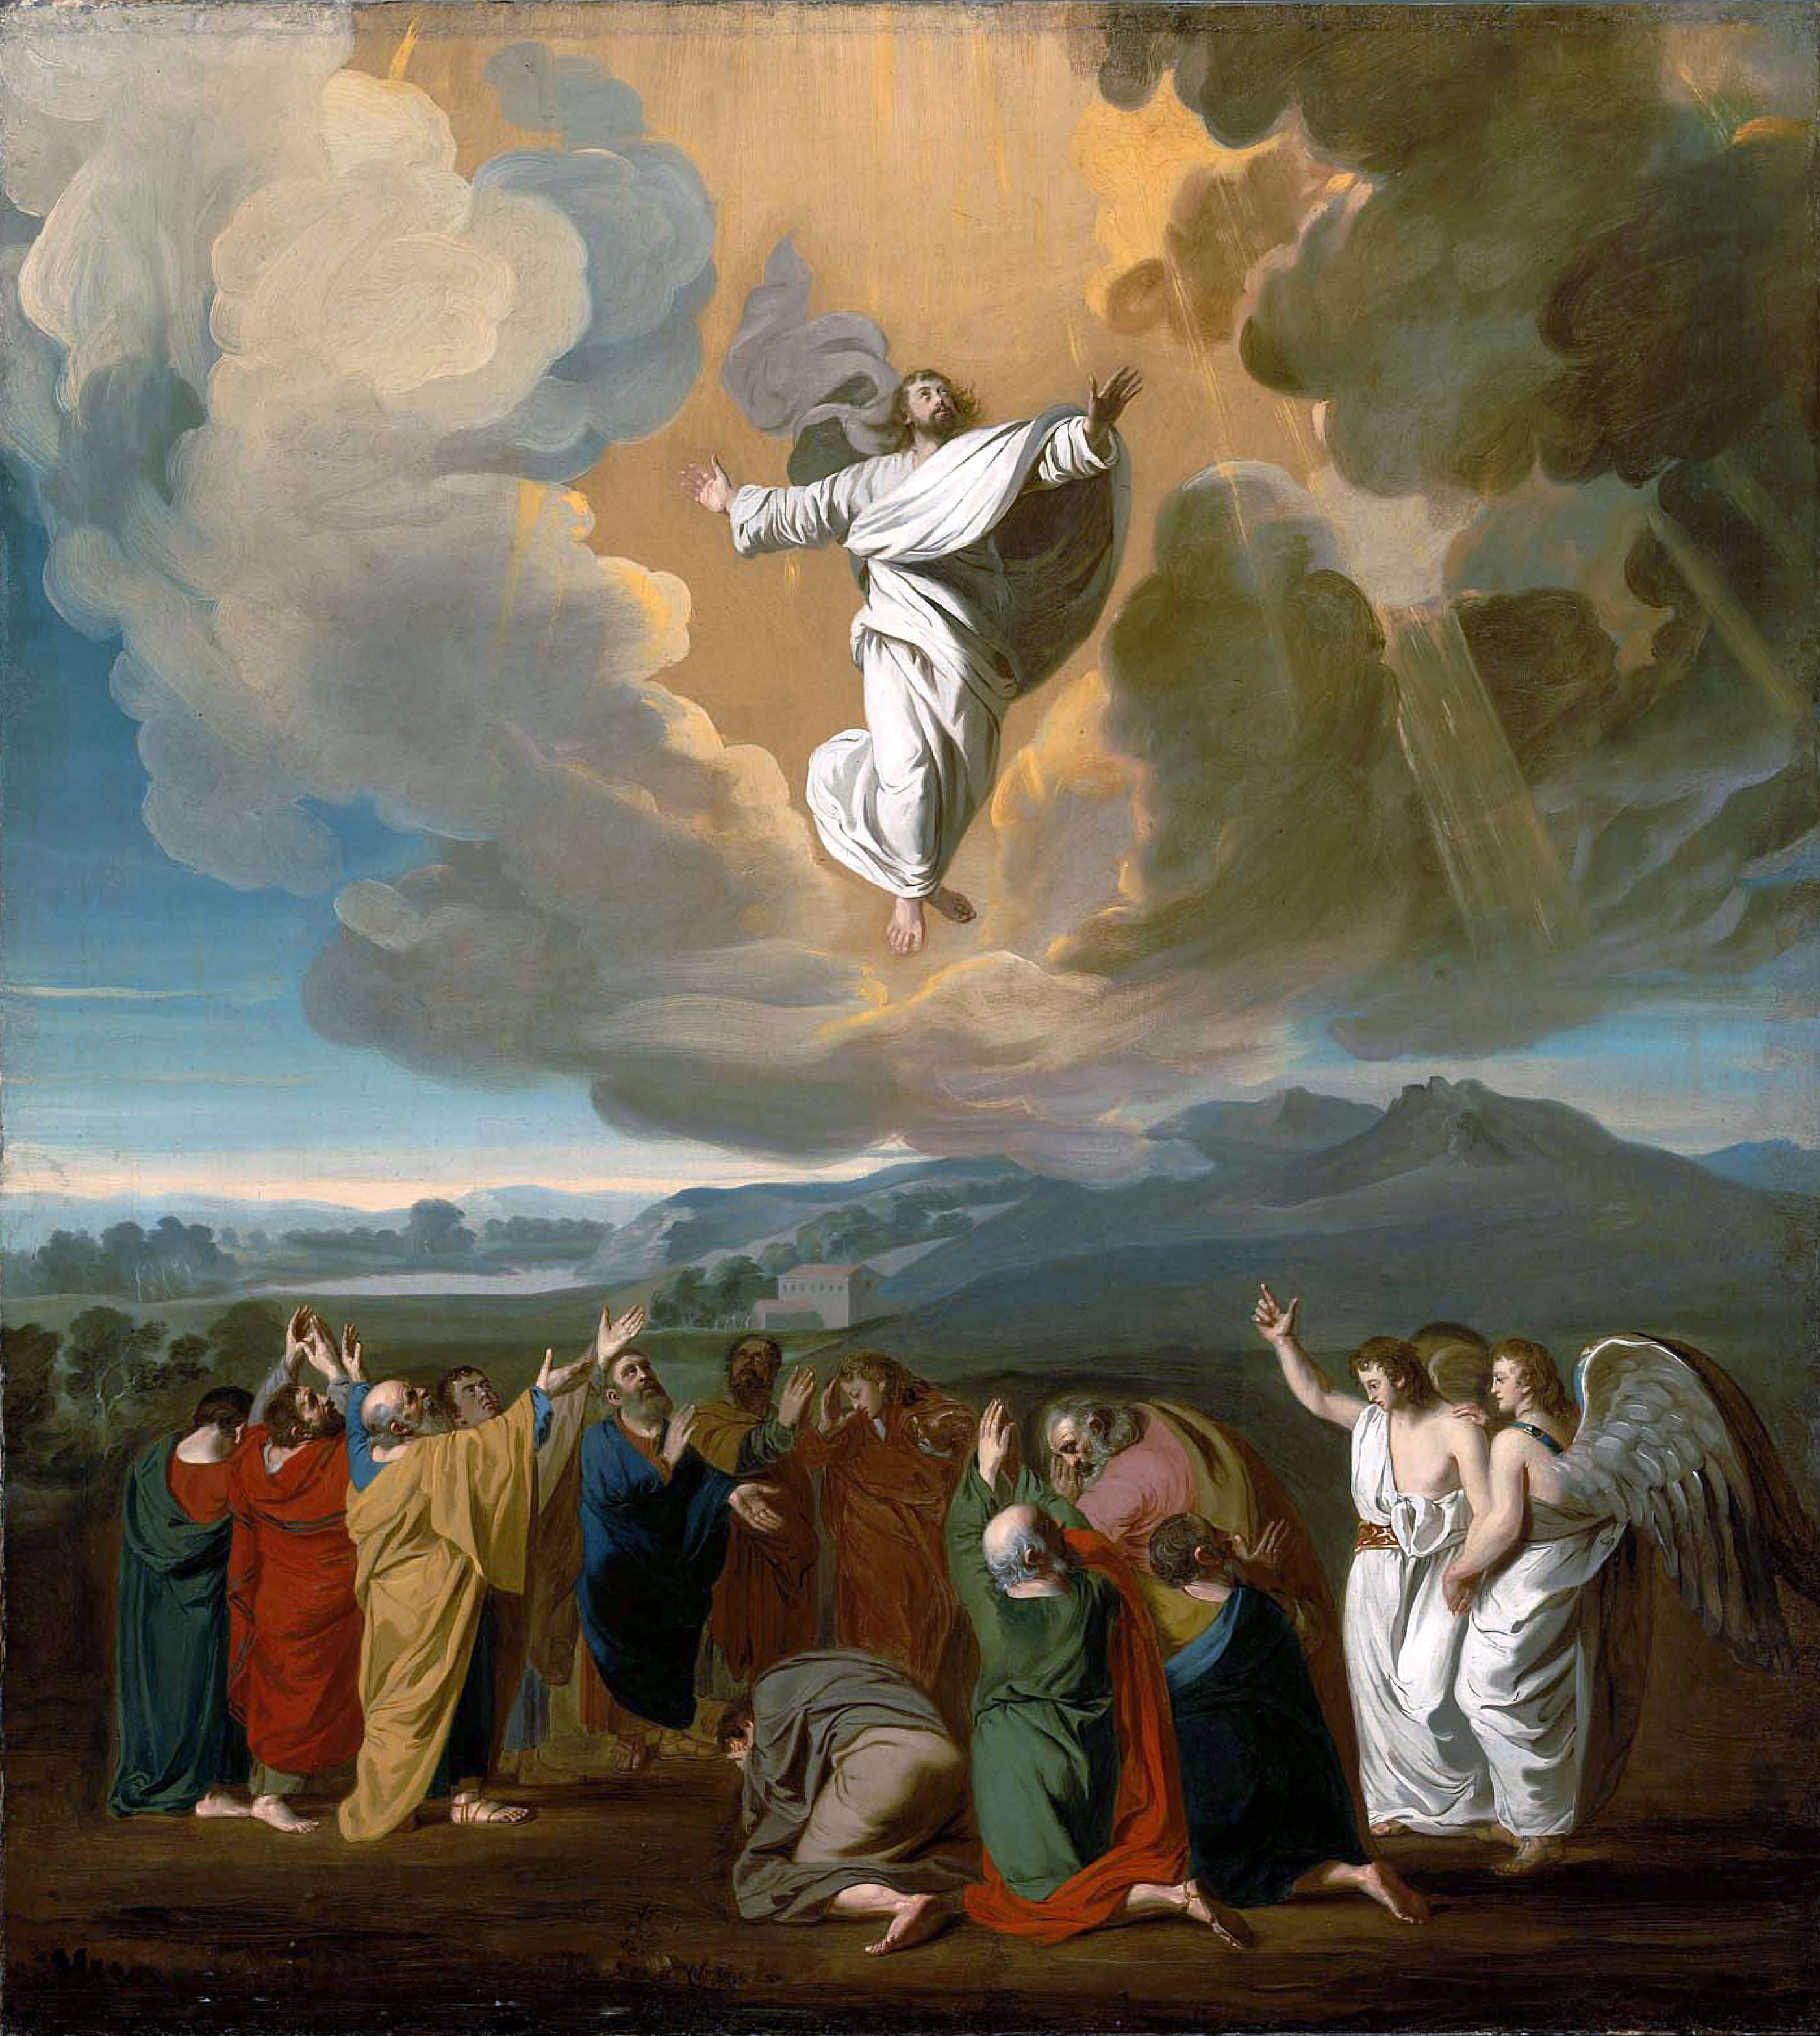 The Ascension of Christ, 1775, by American painter John Singleton Copley (1738-1815), Boston Museum of Fine Arts.